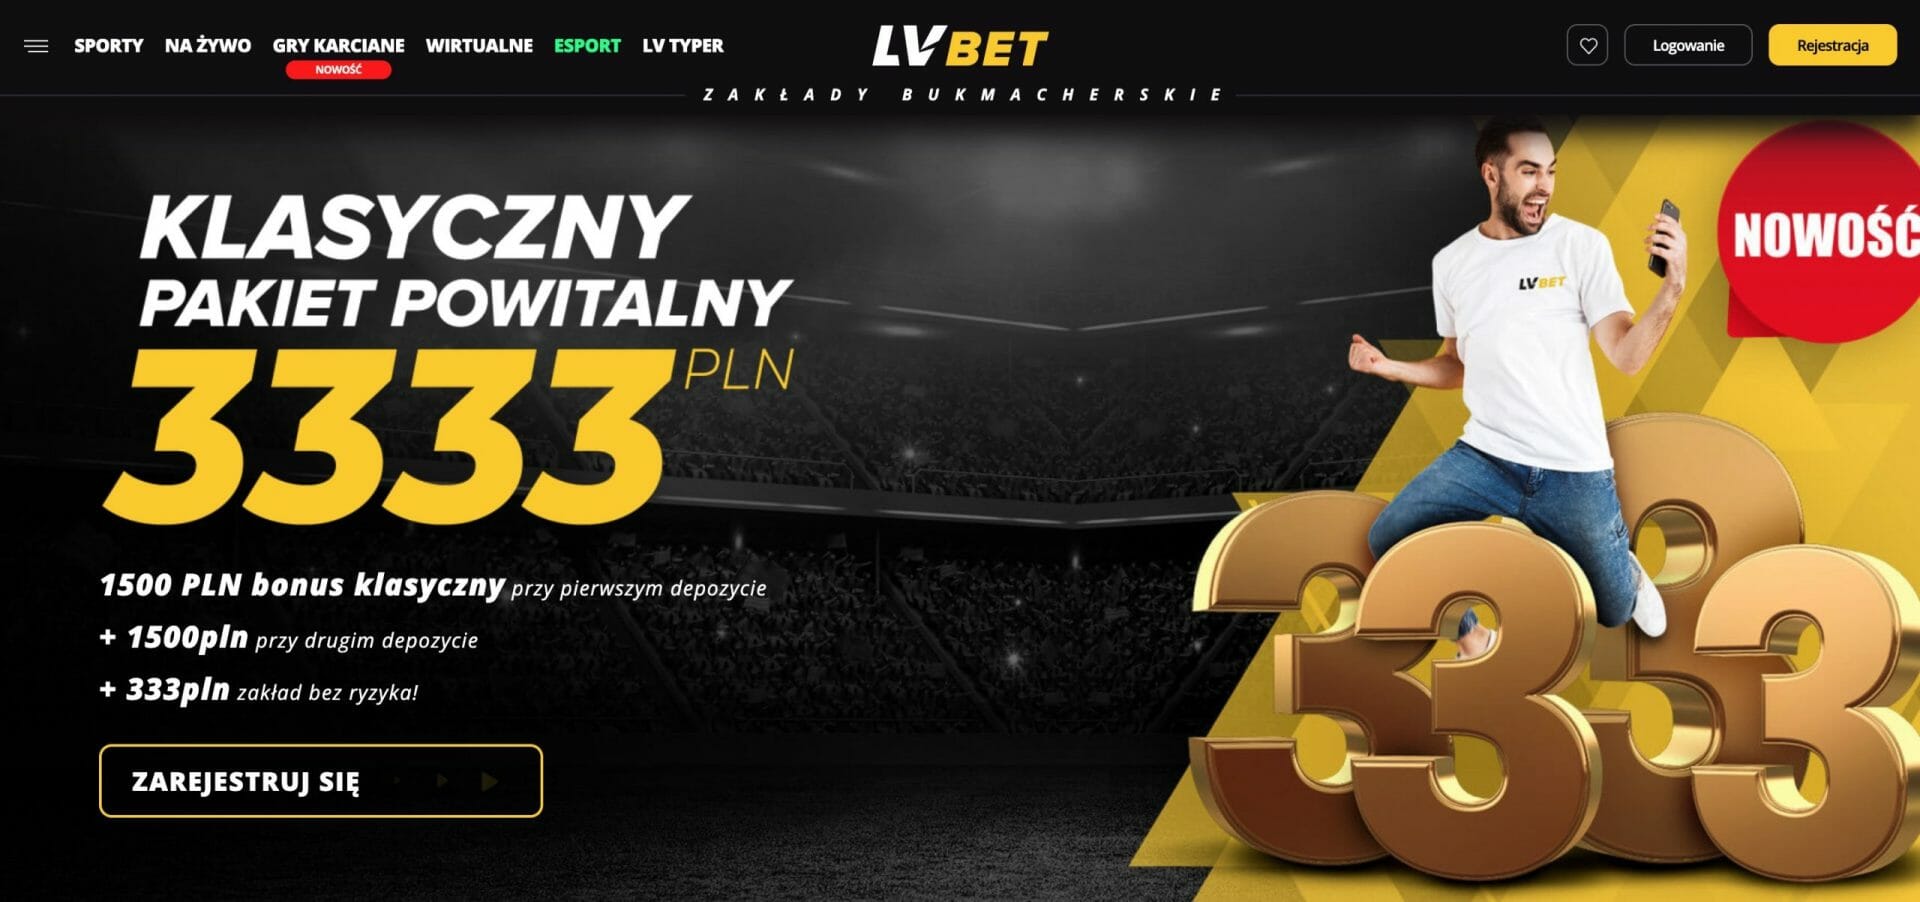 The Best 20 Examples Of The Challenges of Advertising Online Gambling Services in Turkey